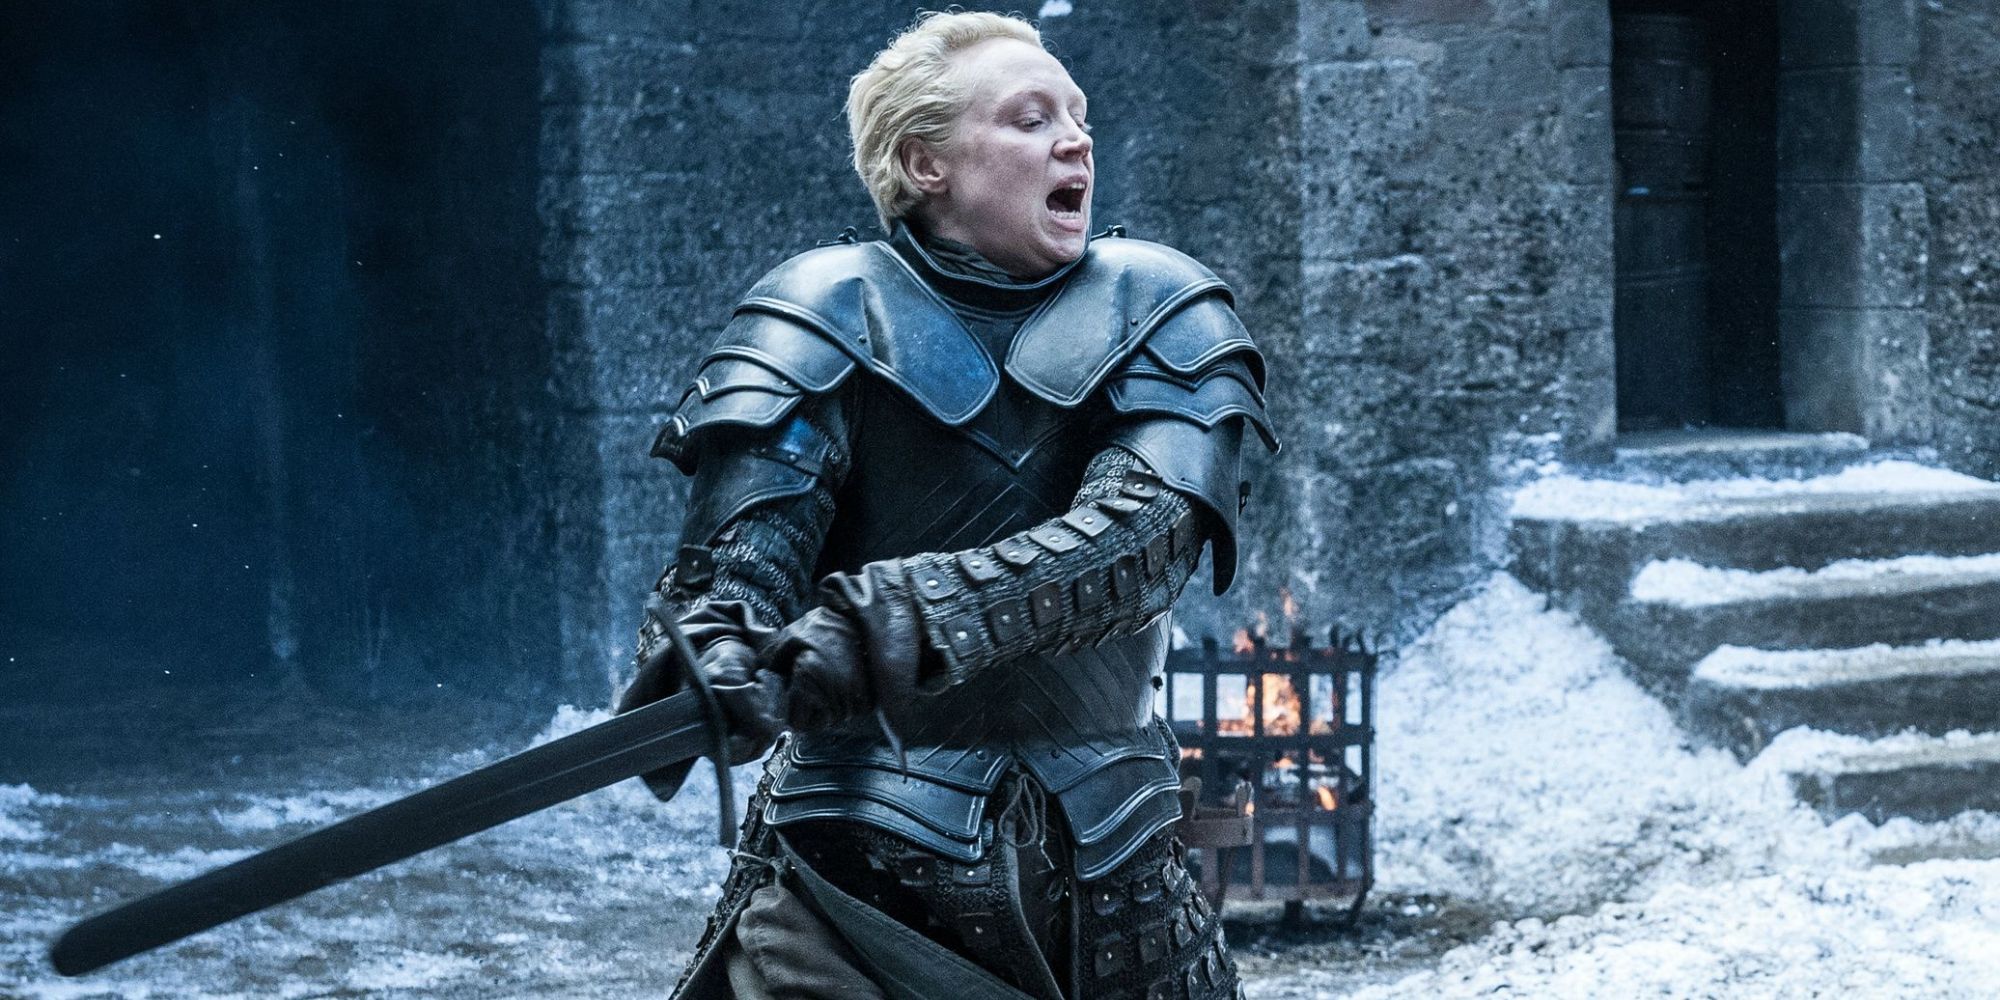 Brienne of Tarth in HBO Game of Thrones Sparring with Arya Season 7